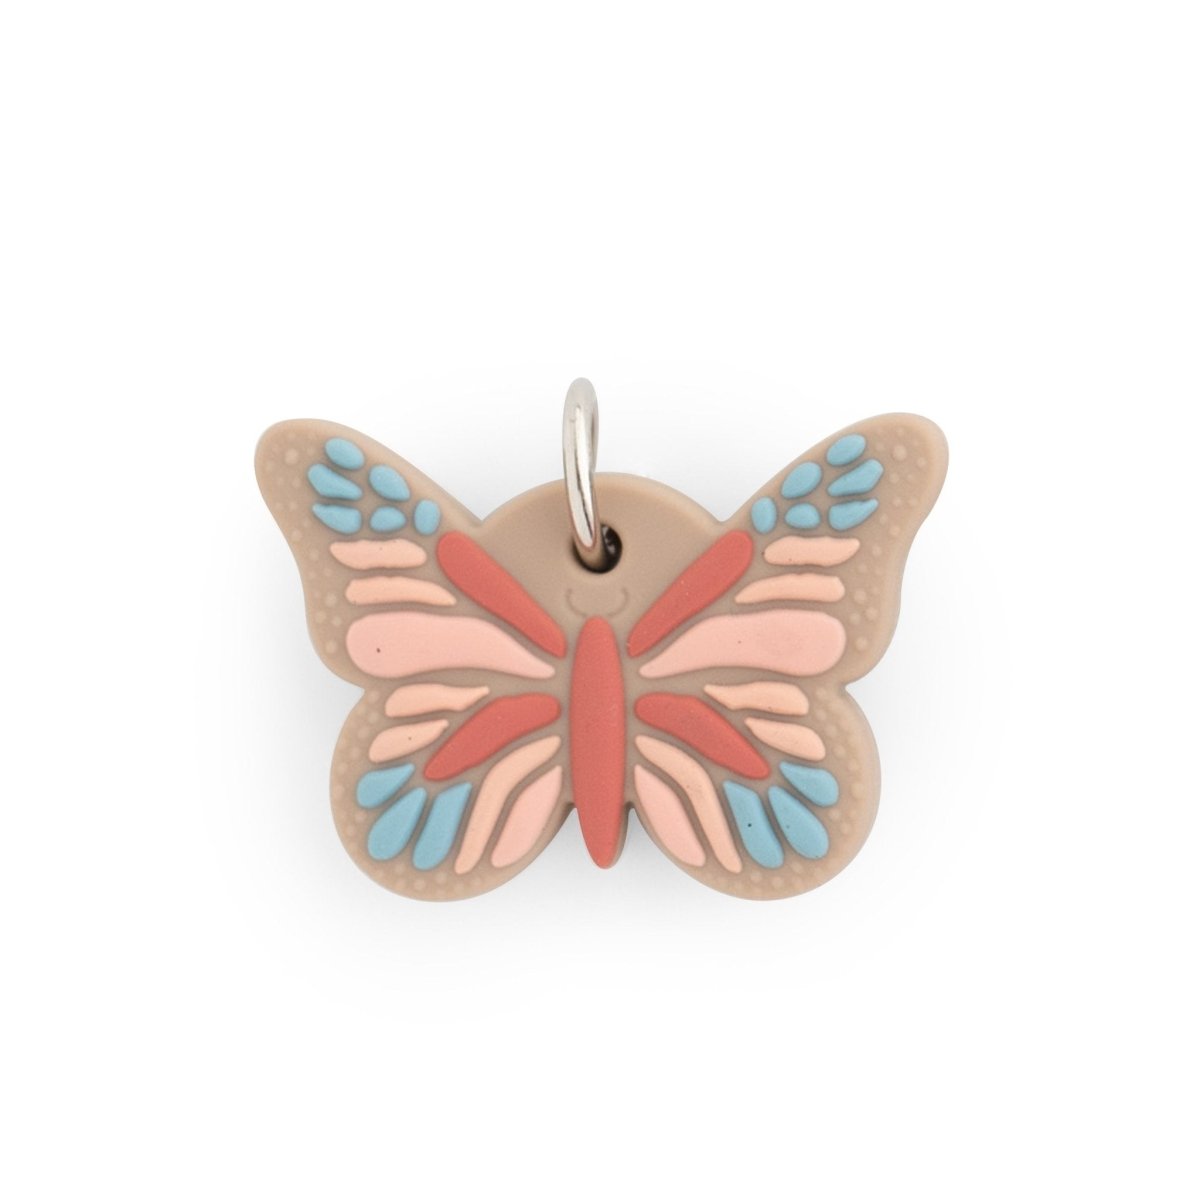 Silicone Charms Butterflies Cappuccino from Cara & Co Craft Supply